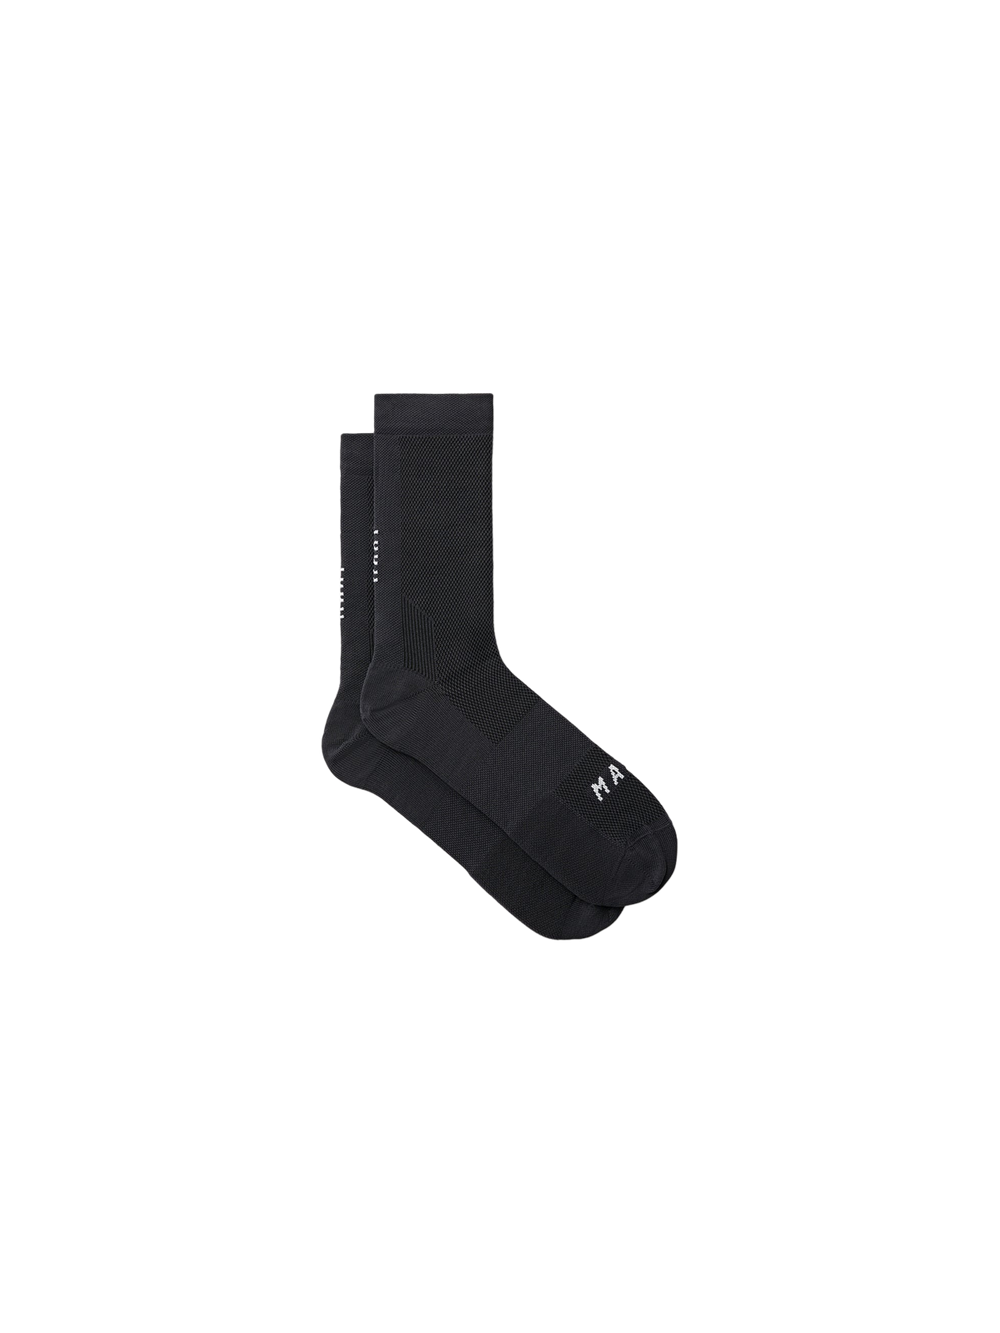 Product Image for Division Mono Sock